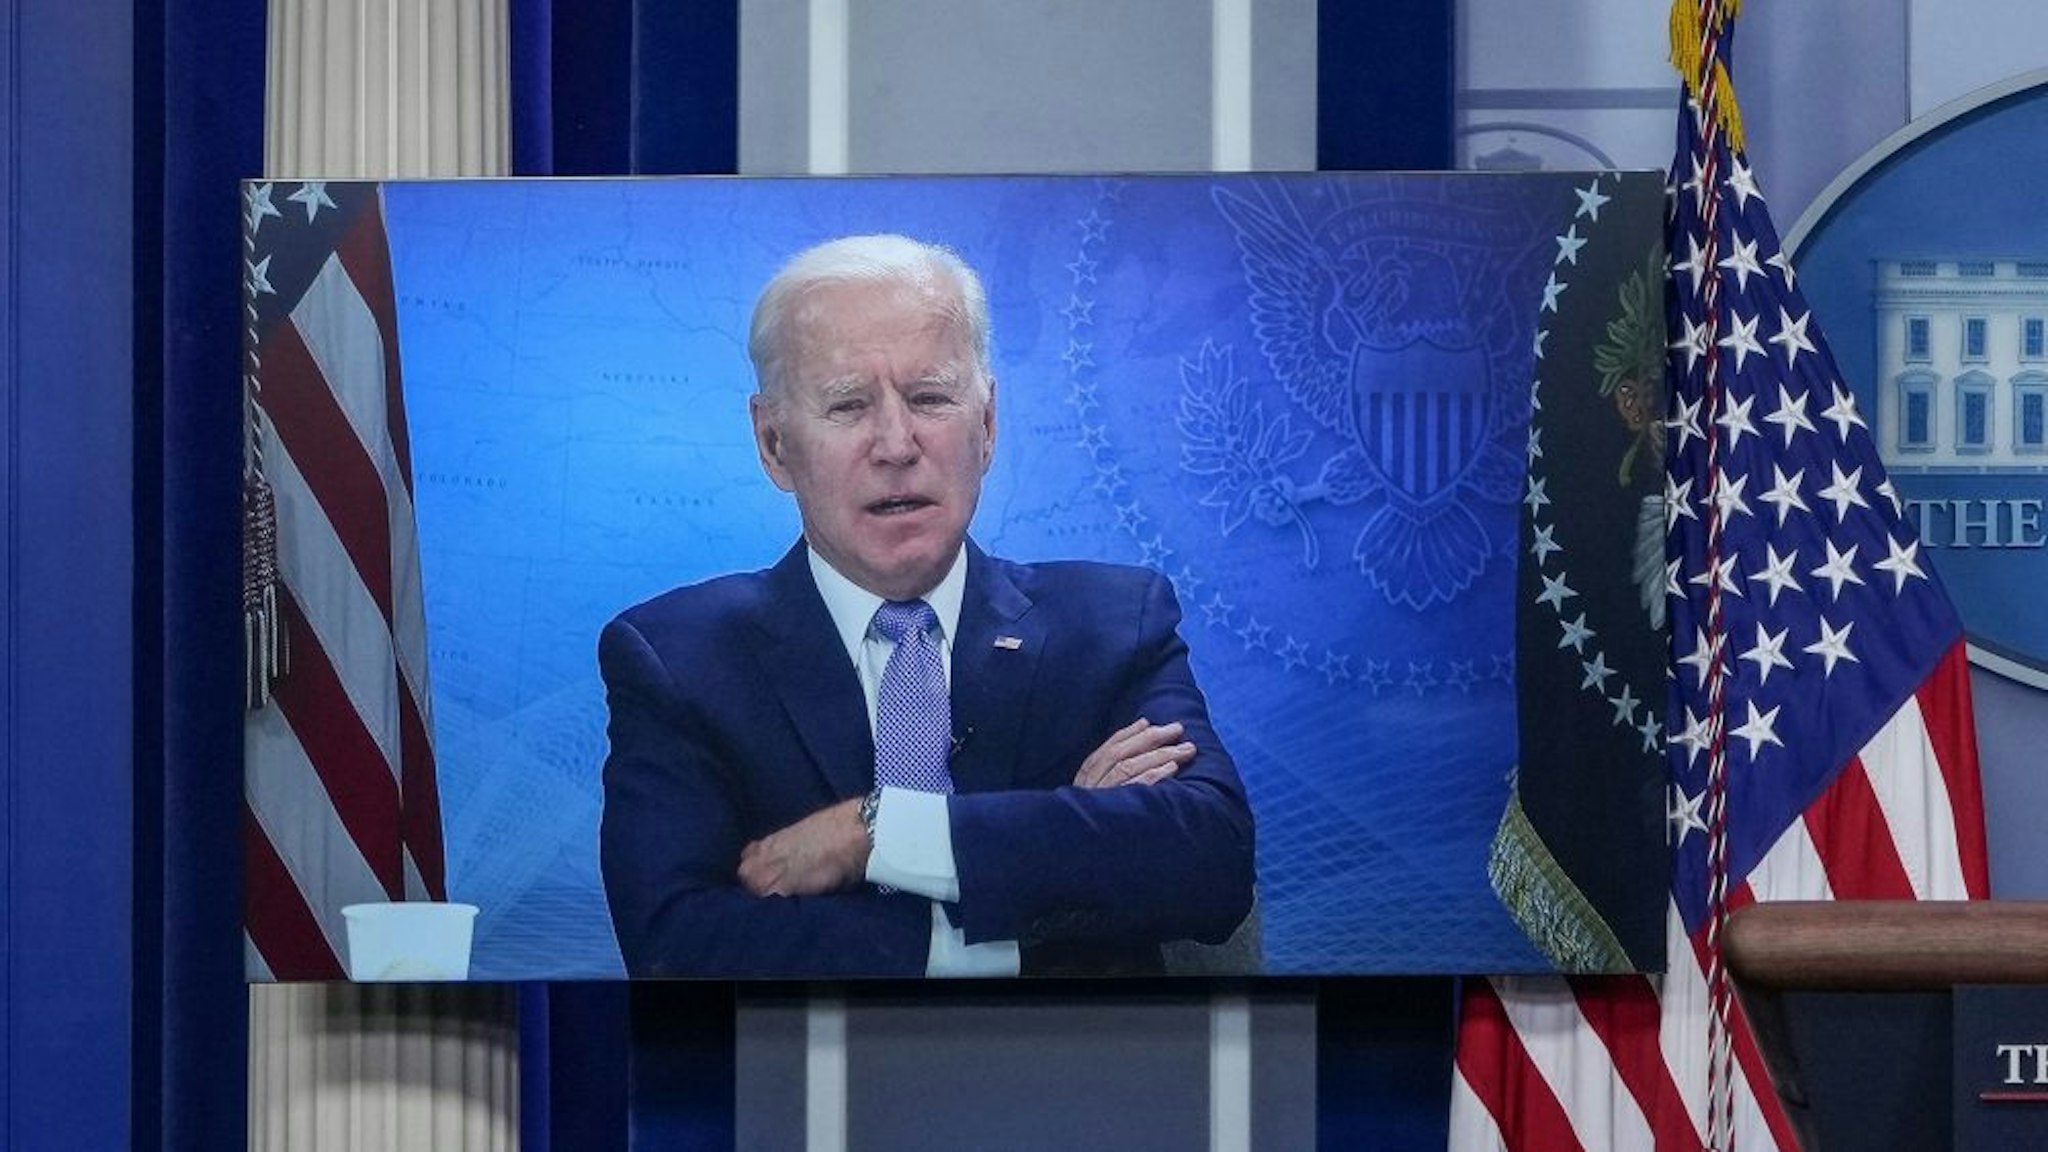 WASHINGTON, DC - MAY 11: President Joe Biden is displayed on a monitor in the press briefing room while he attends a virtual meeting with governors at the White House on May 11, 2021 in Washington, DC. Biden met with a bipartisan group of six governors to discuss best practices in vaccinating citizens for COVID-19.